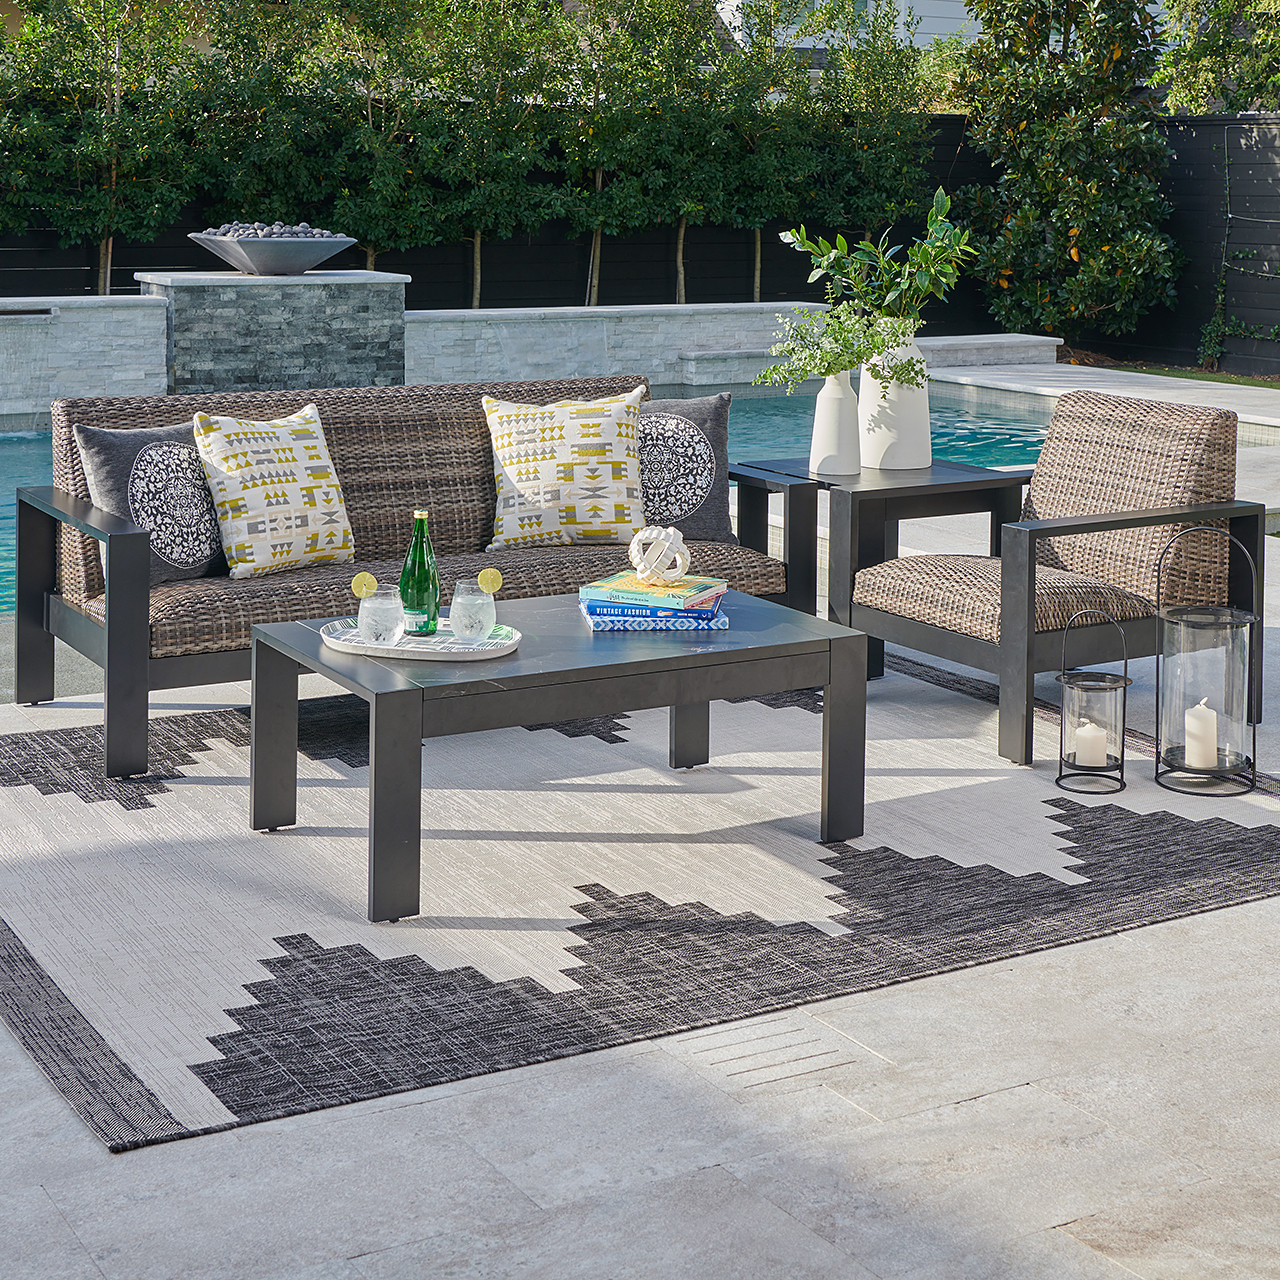 Chelsea Textured Black Aluminum and Weathered Teak Outdoor Wicker Concealed Cushions 3 Pc. Sofa Group + 46 x 26 in. Coffee Table 